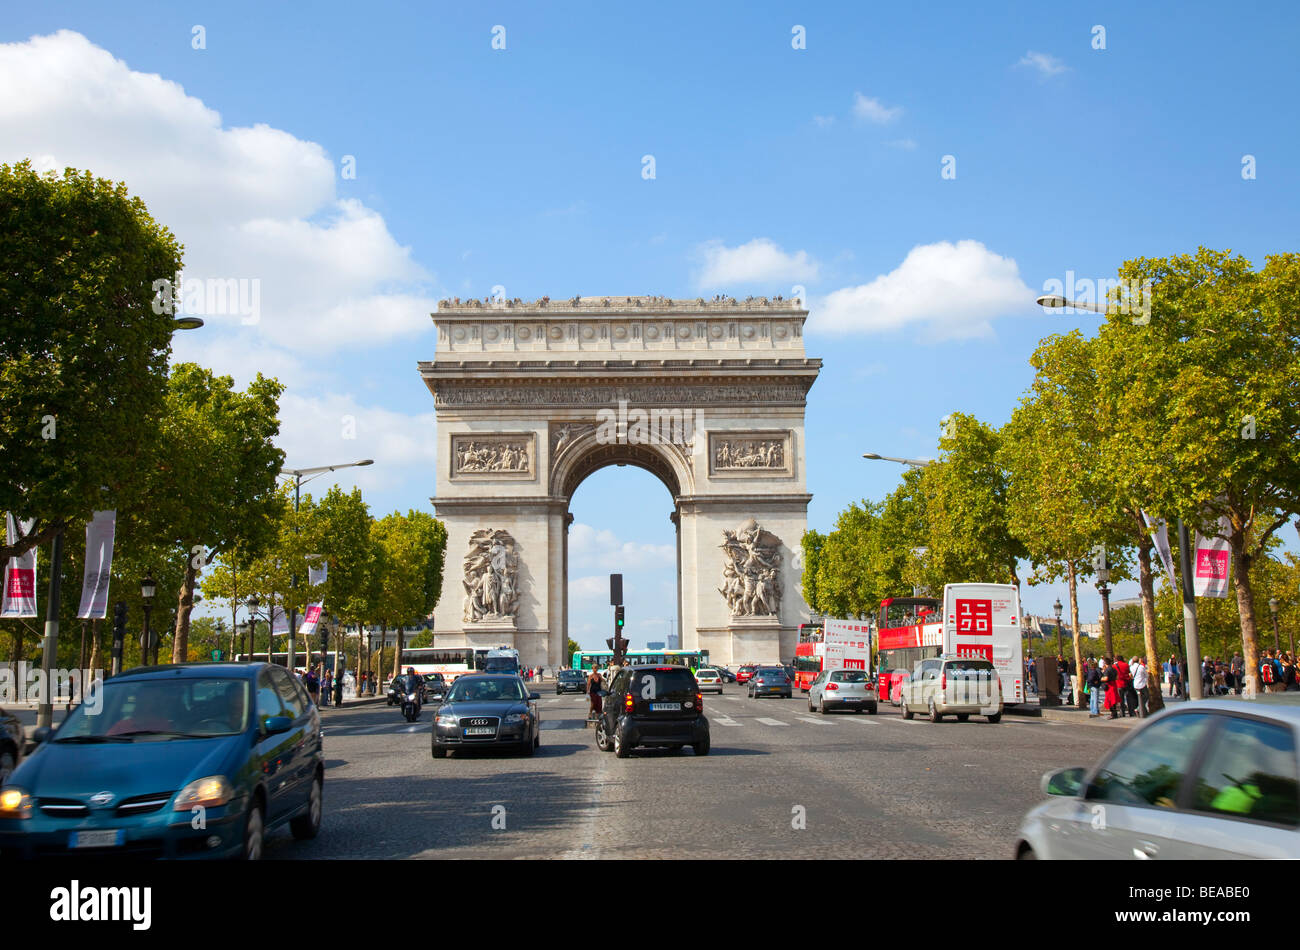 The Arc de Triomphe and Champs Elysees in Paris France Stock Photo